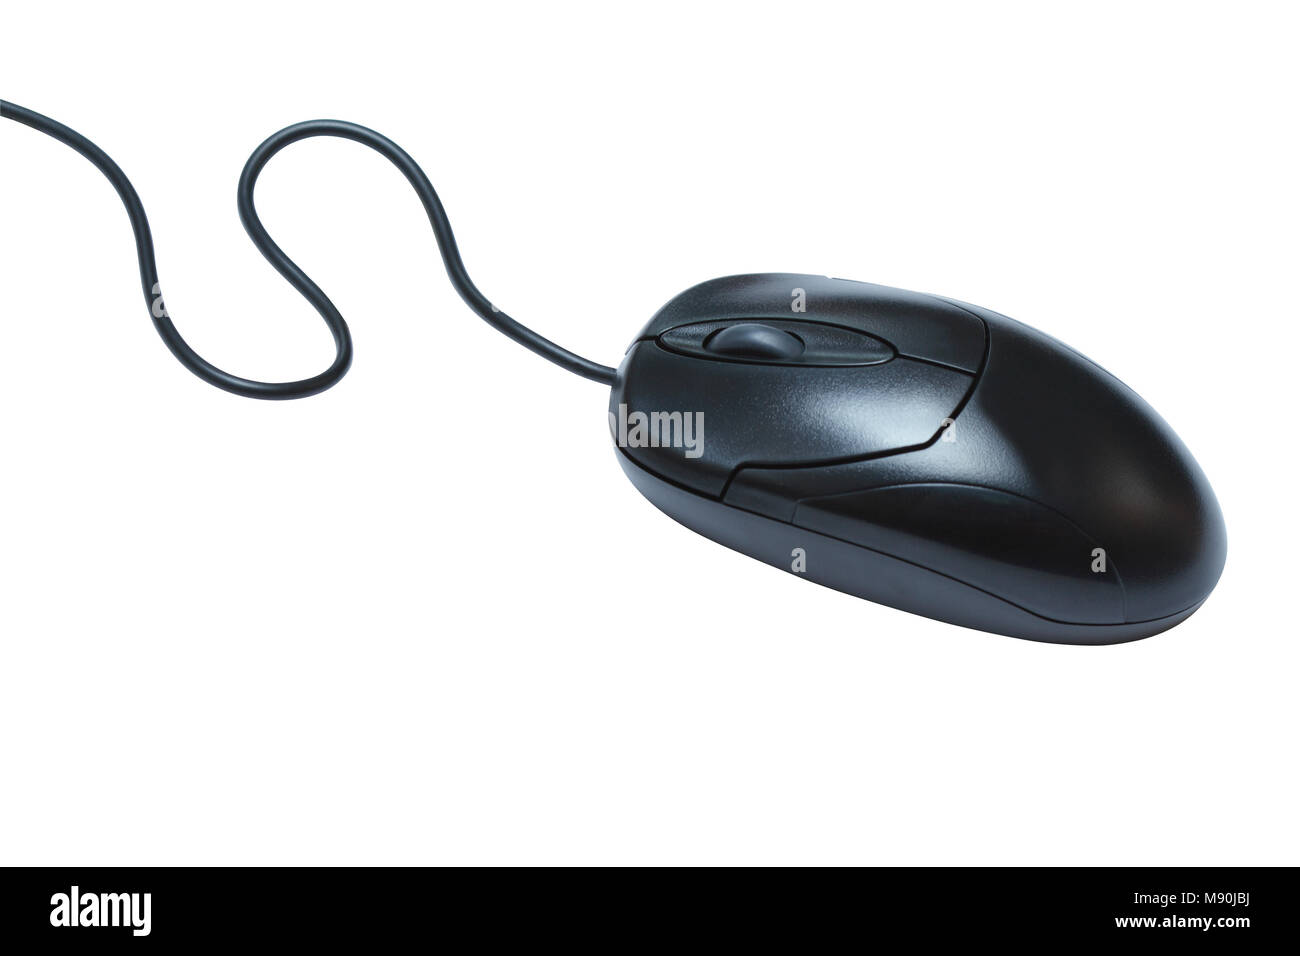 Black computer mouse isolated on white background with clipping path Stock Photo